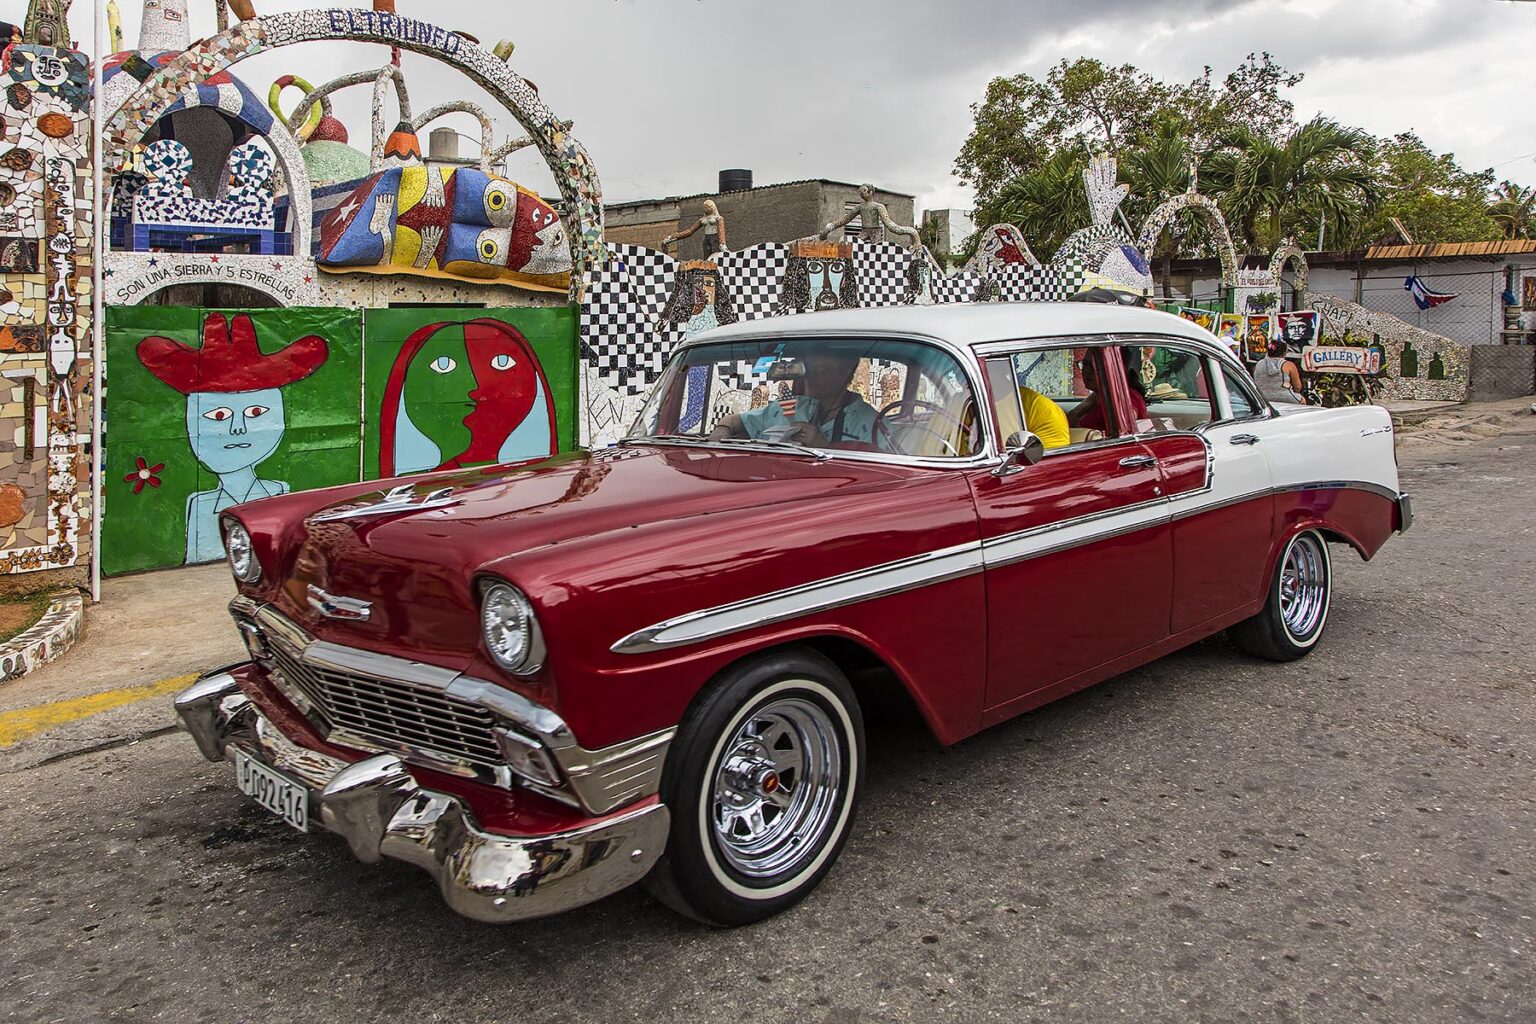 AMERICAN CLASIC CARS in front of FUSTERLANDIA, a mosaic wonderland created by artist JOSE FUSTER - HAVANA, CUBA